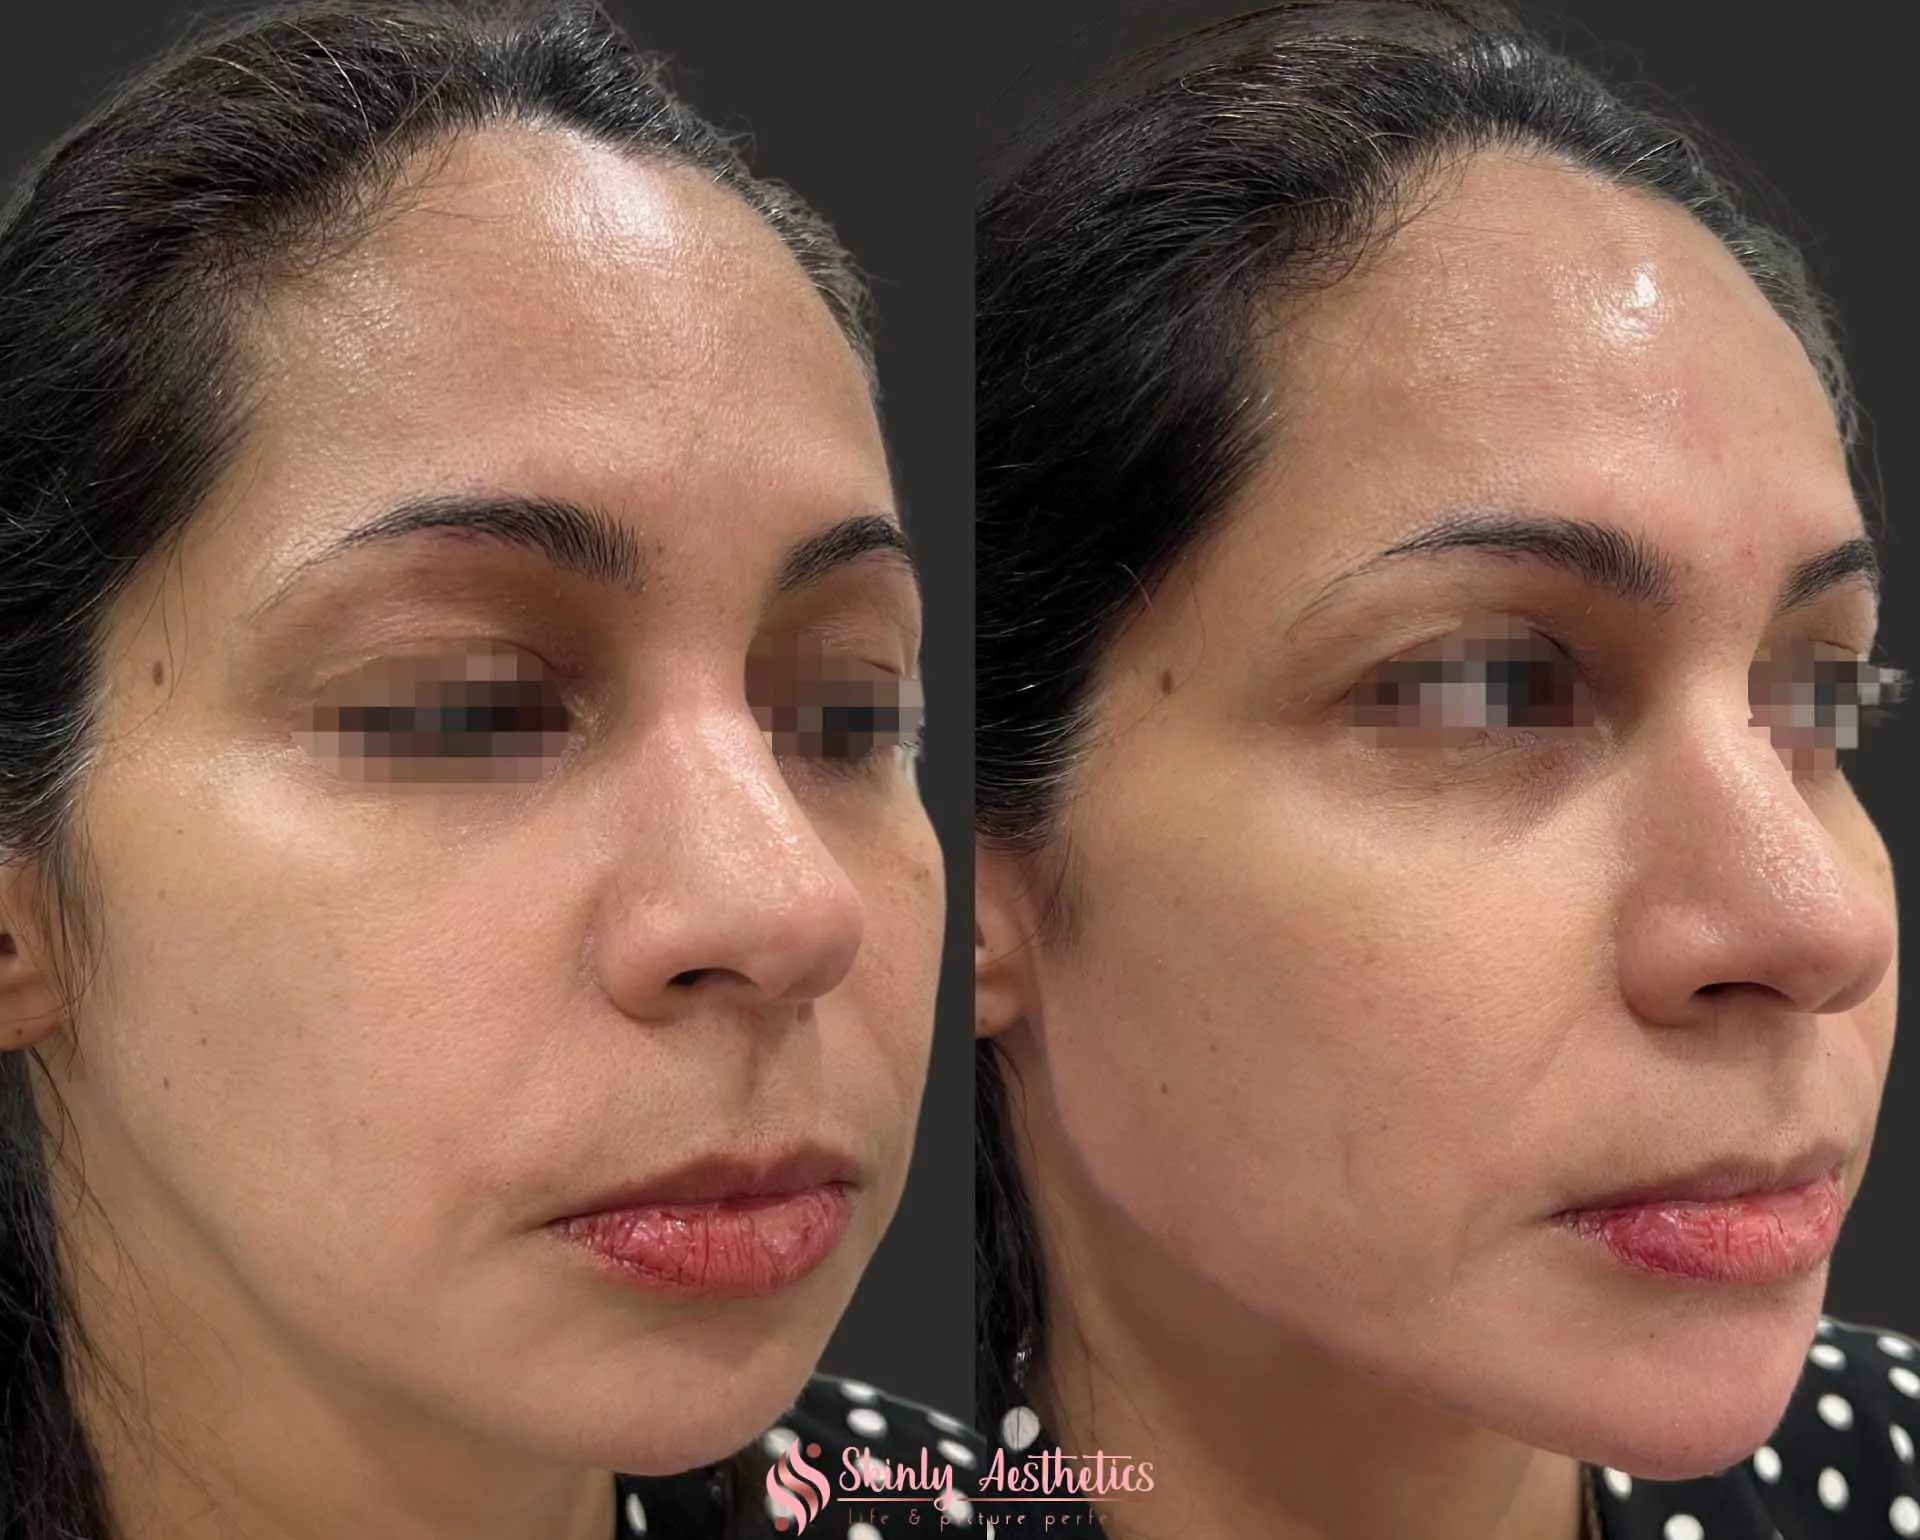 jawline and chin reshaping and sculpting with Radiesse and Juvederm fillers